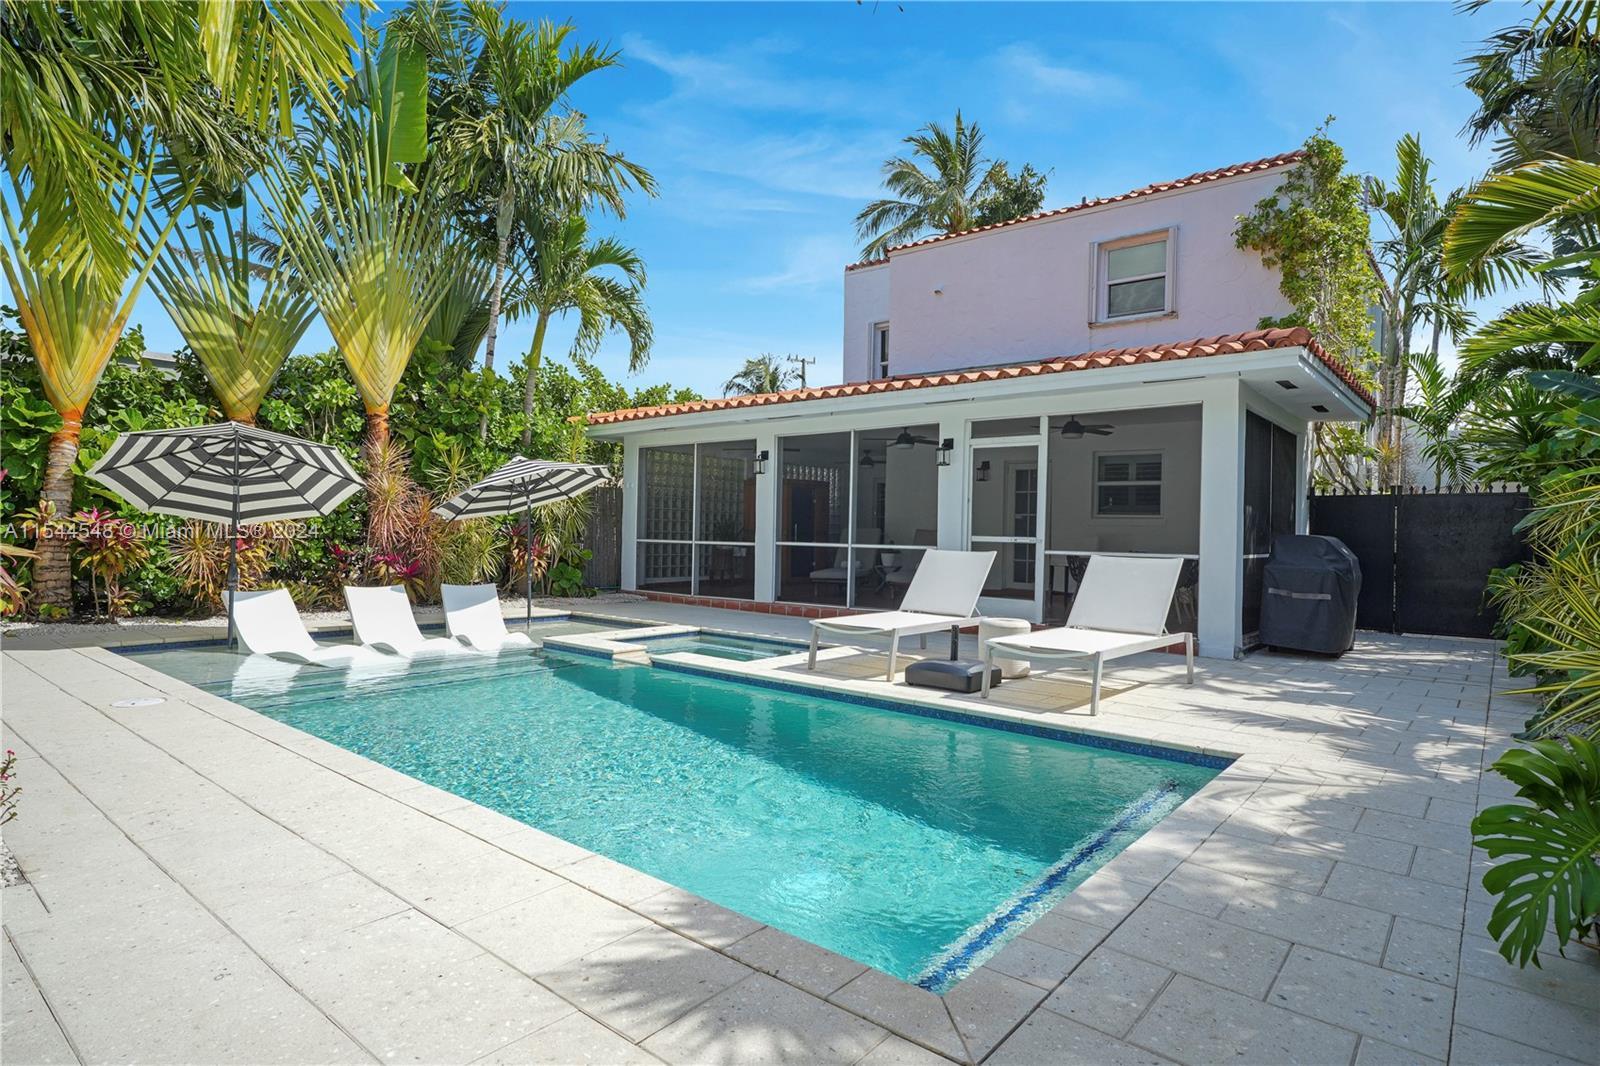 Photo of 3478 Royal Palm Ave in Miami Beach, FL